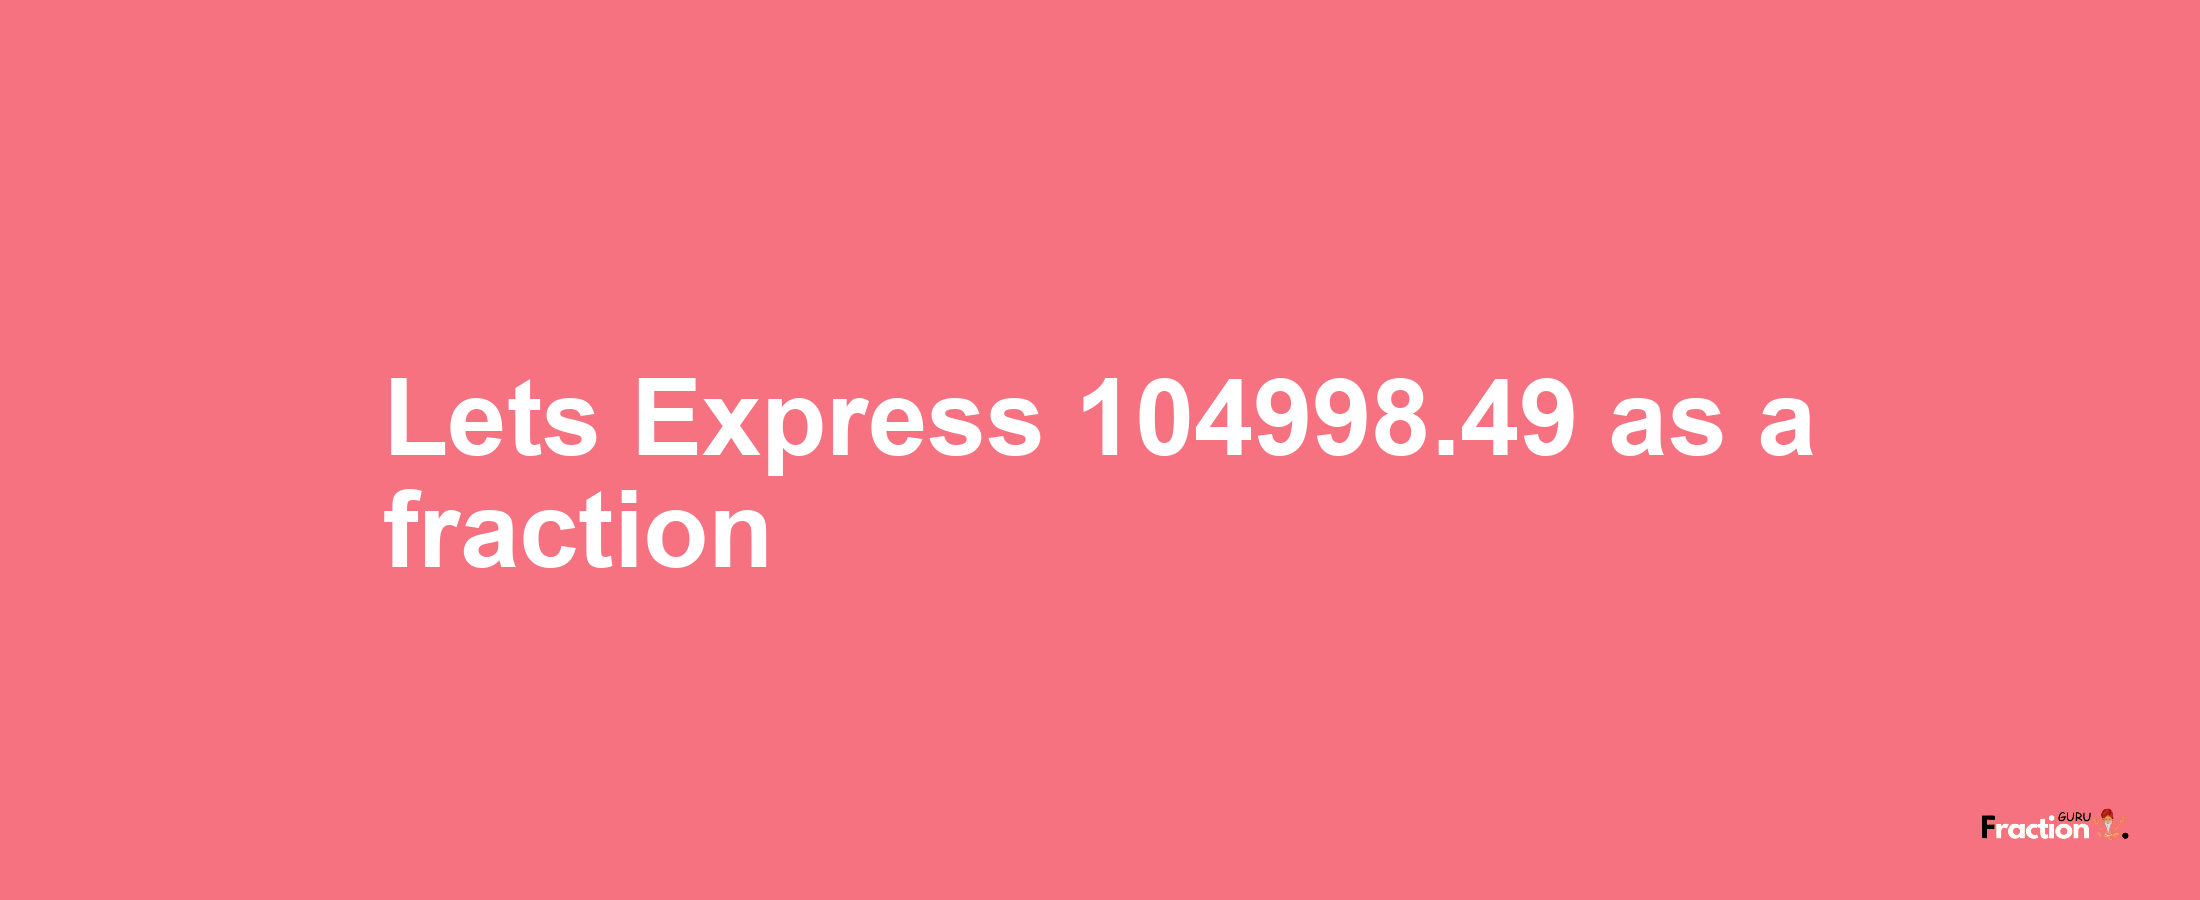 Lets Express 104998.49 as afraction